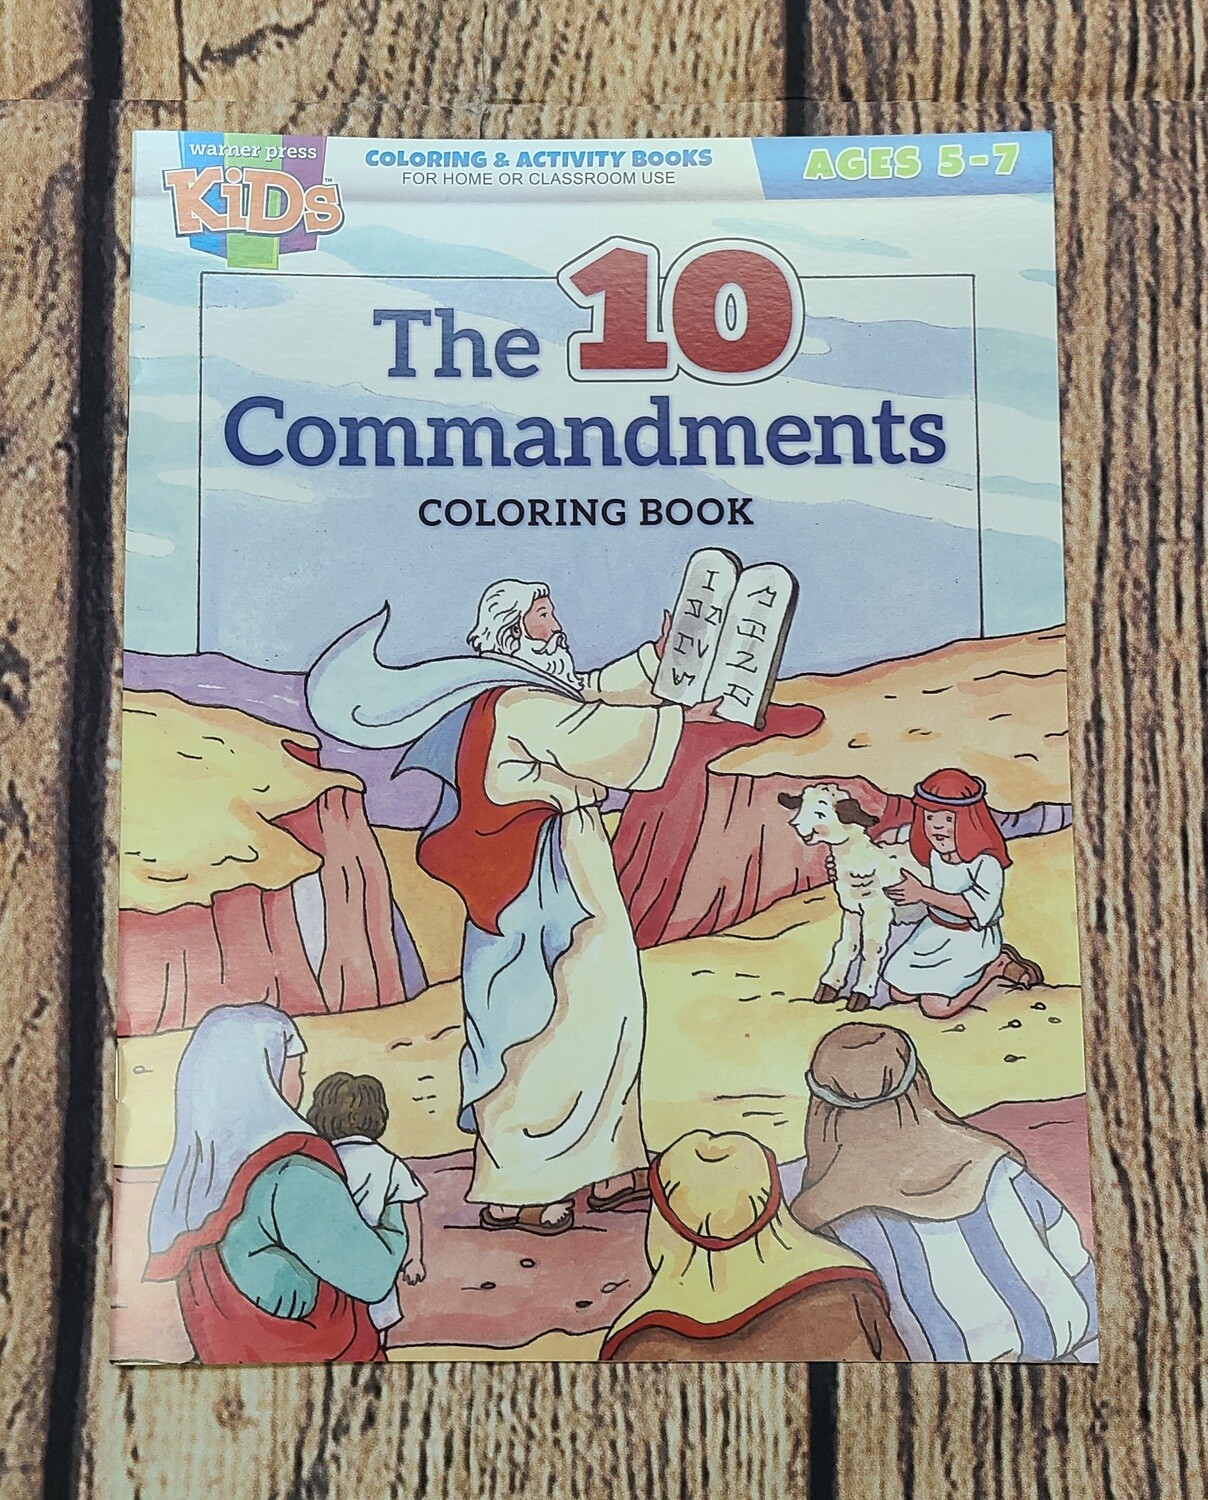 The 10 Commandments Coloring and Activity Book for Kids